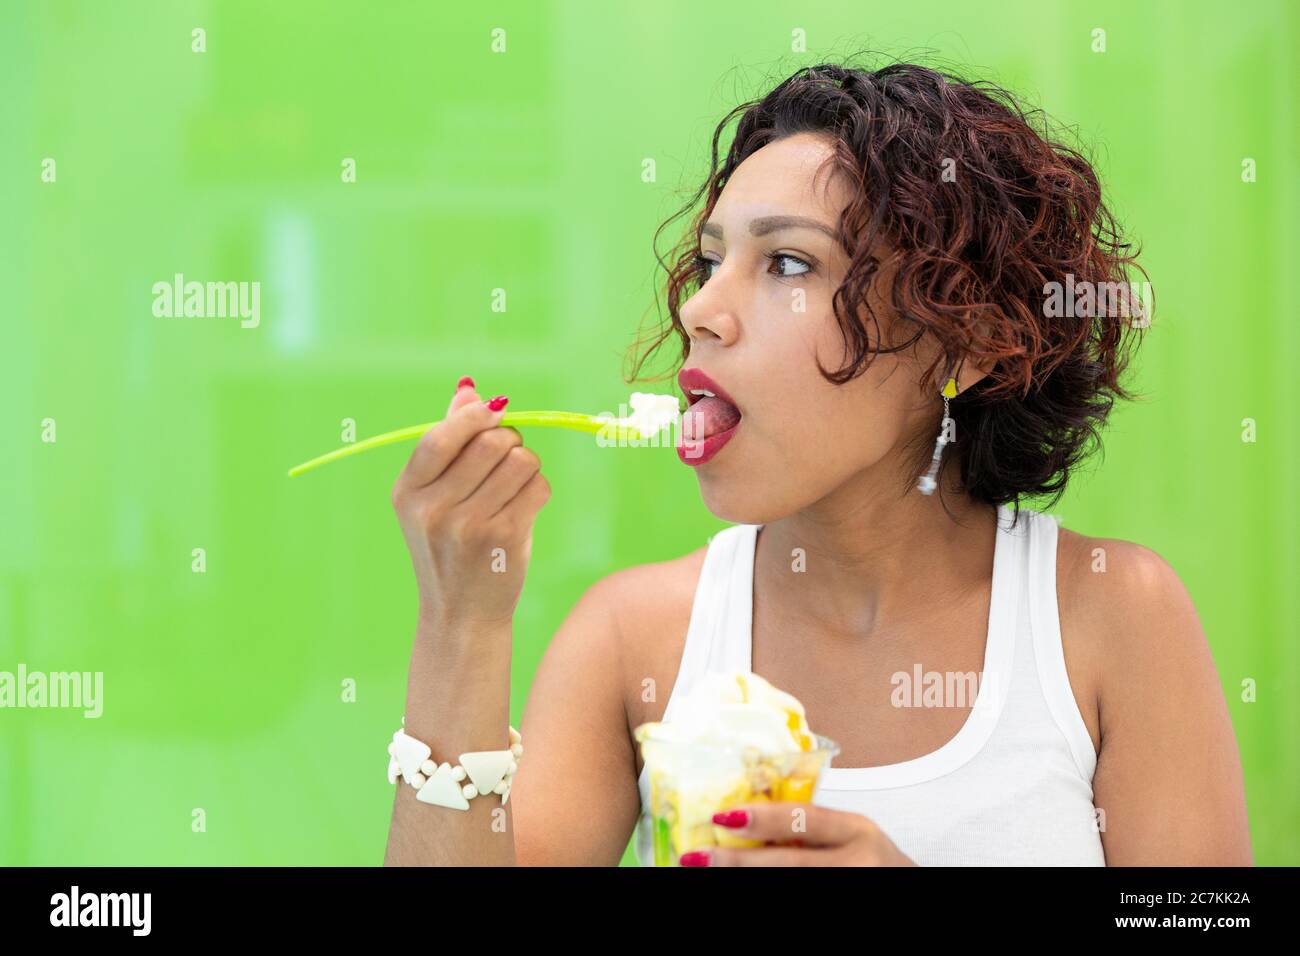 Close-up of Latin girl having ice cream on a green background. Space for text. Selective focus. Summer and healthy lifestyle concept. Stock Photo